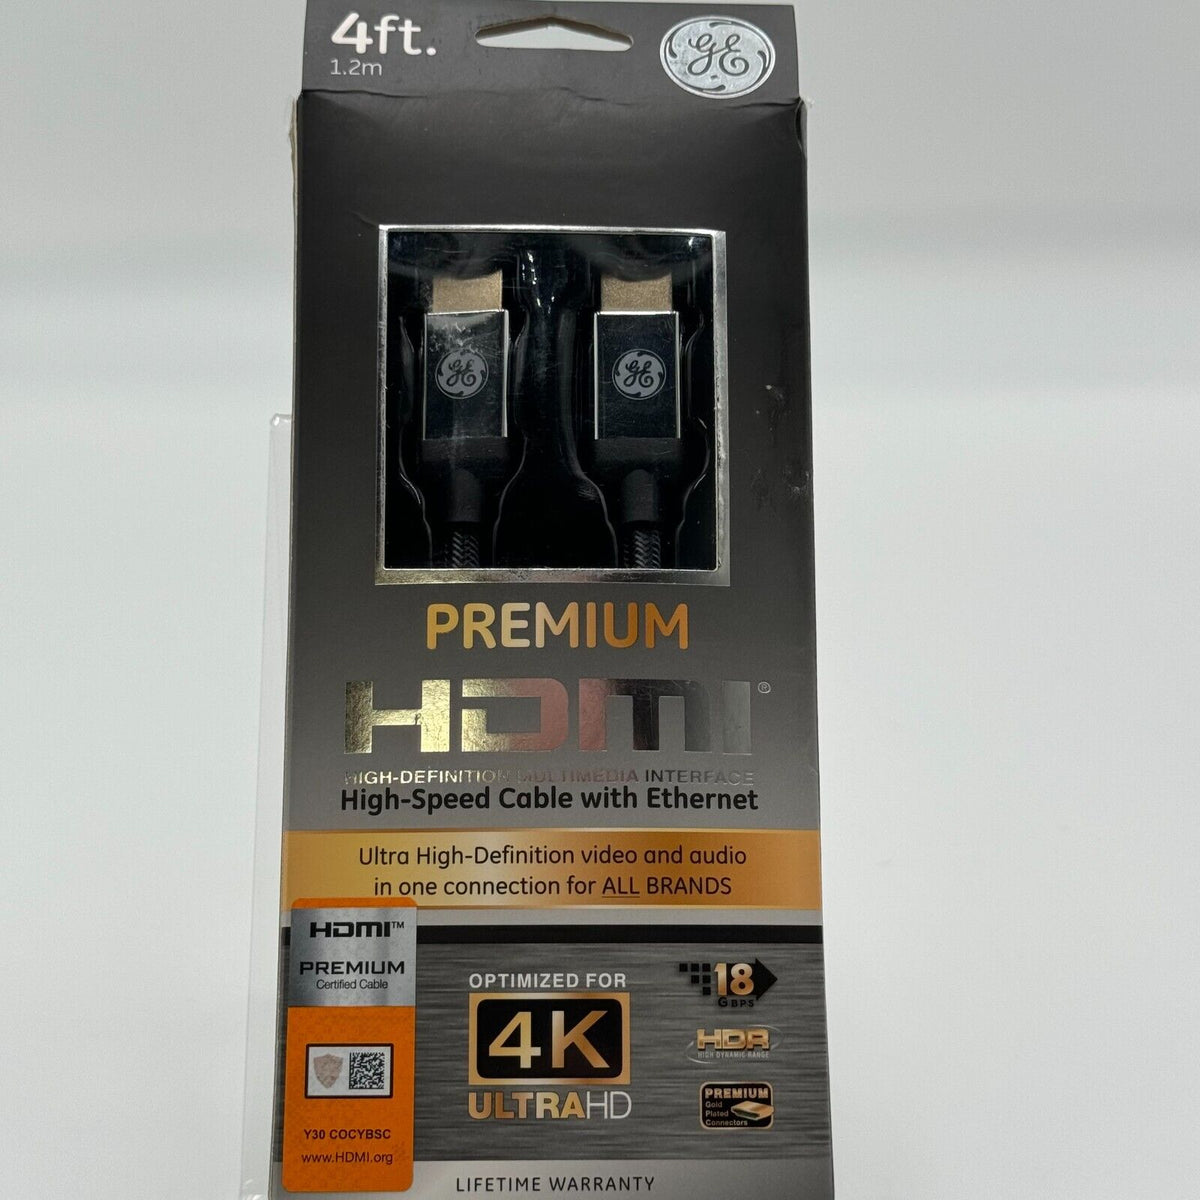 GE 4' Premium HDMI High-Speed Cable with Ethernet 4K Ultra HD 18GBPS Gold Plate